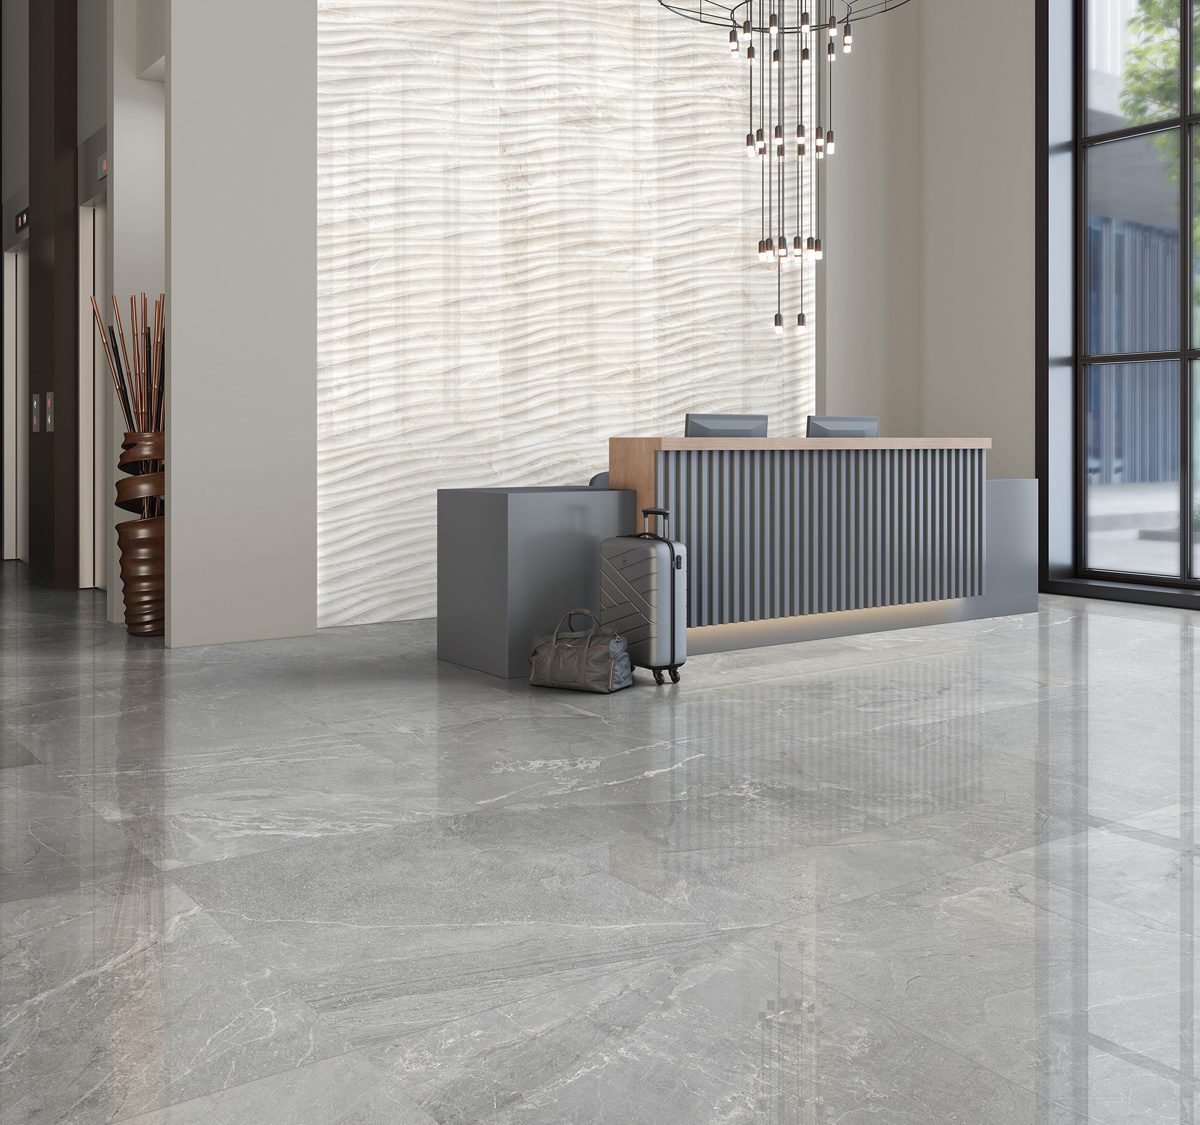 A office building entryway with a textured accent using Florida Tile Tempo and a grey polished porcelain floor.